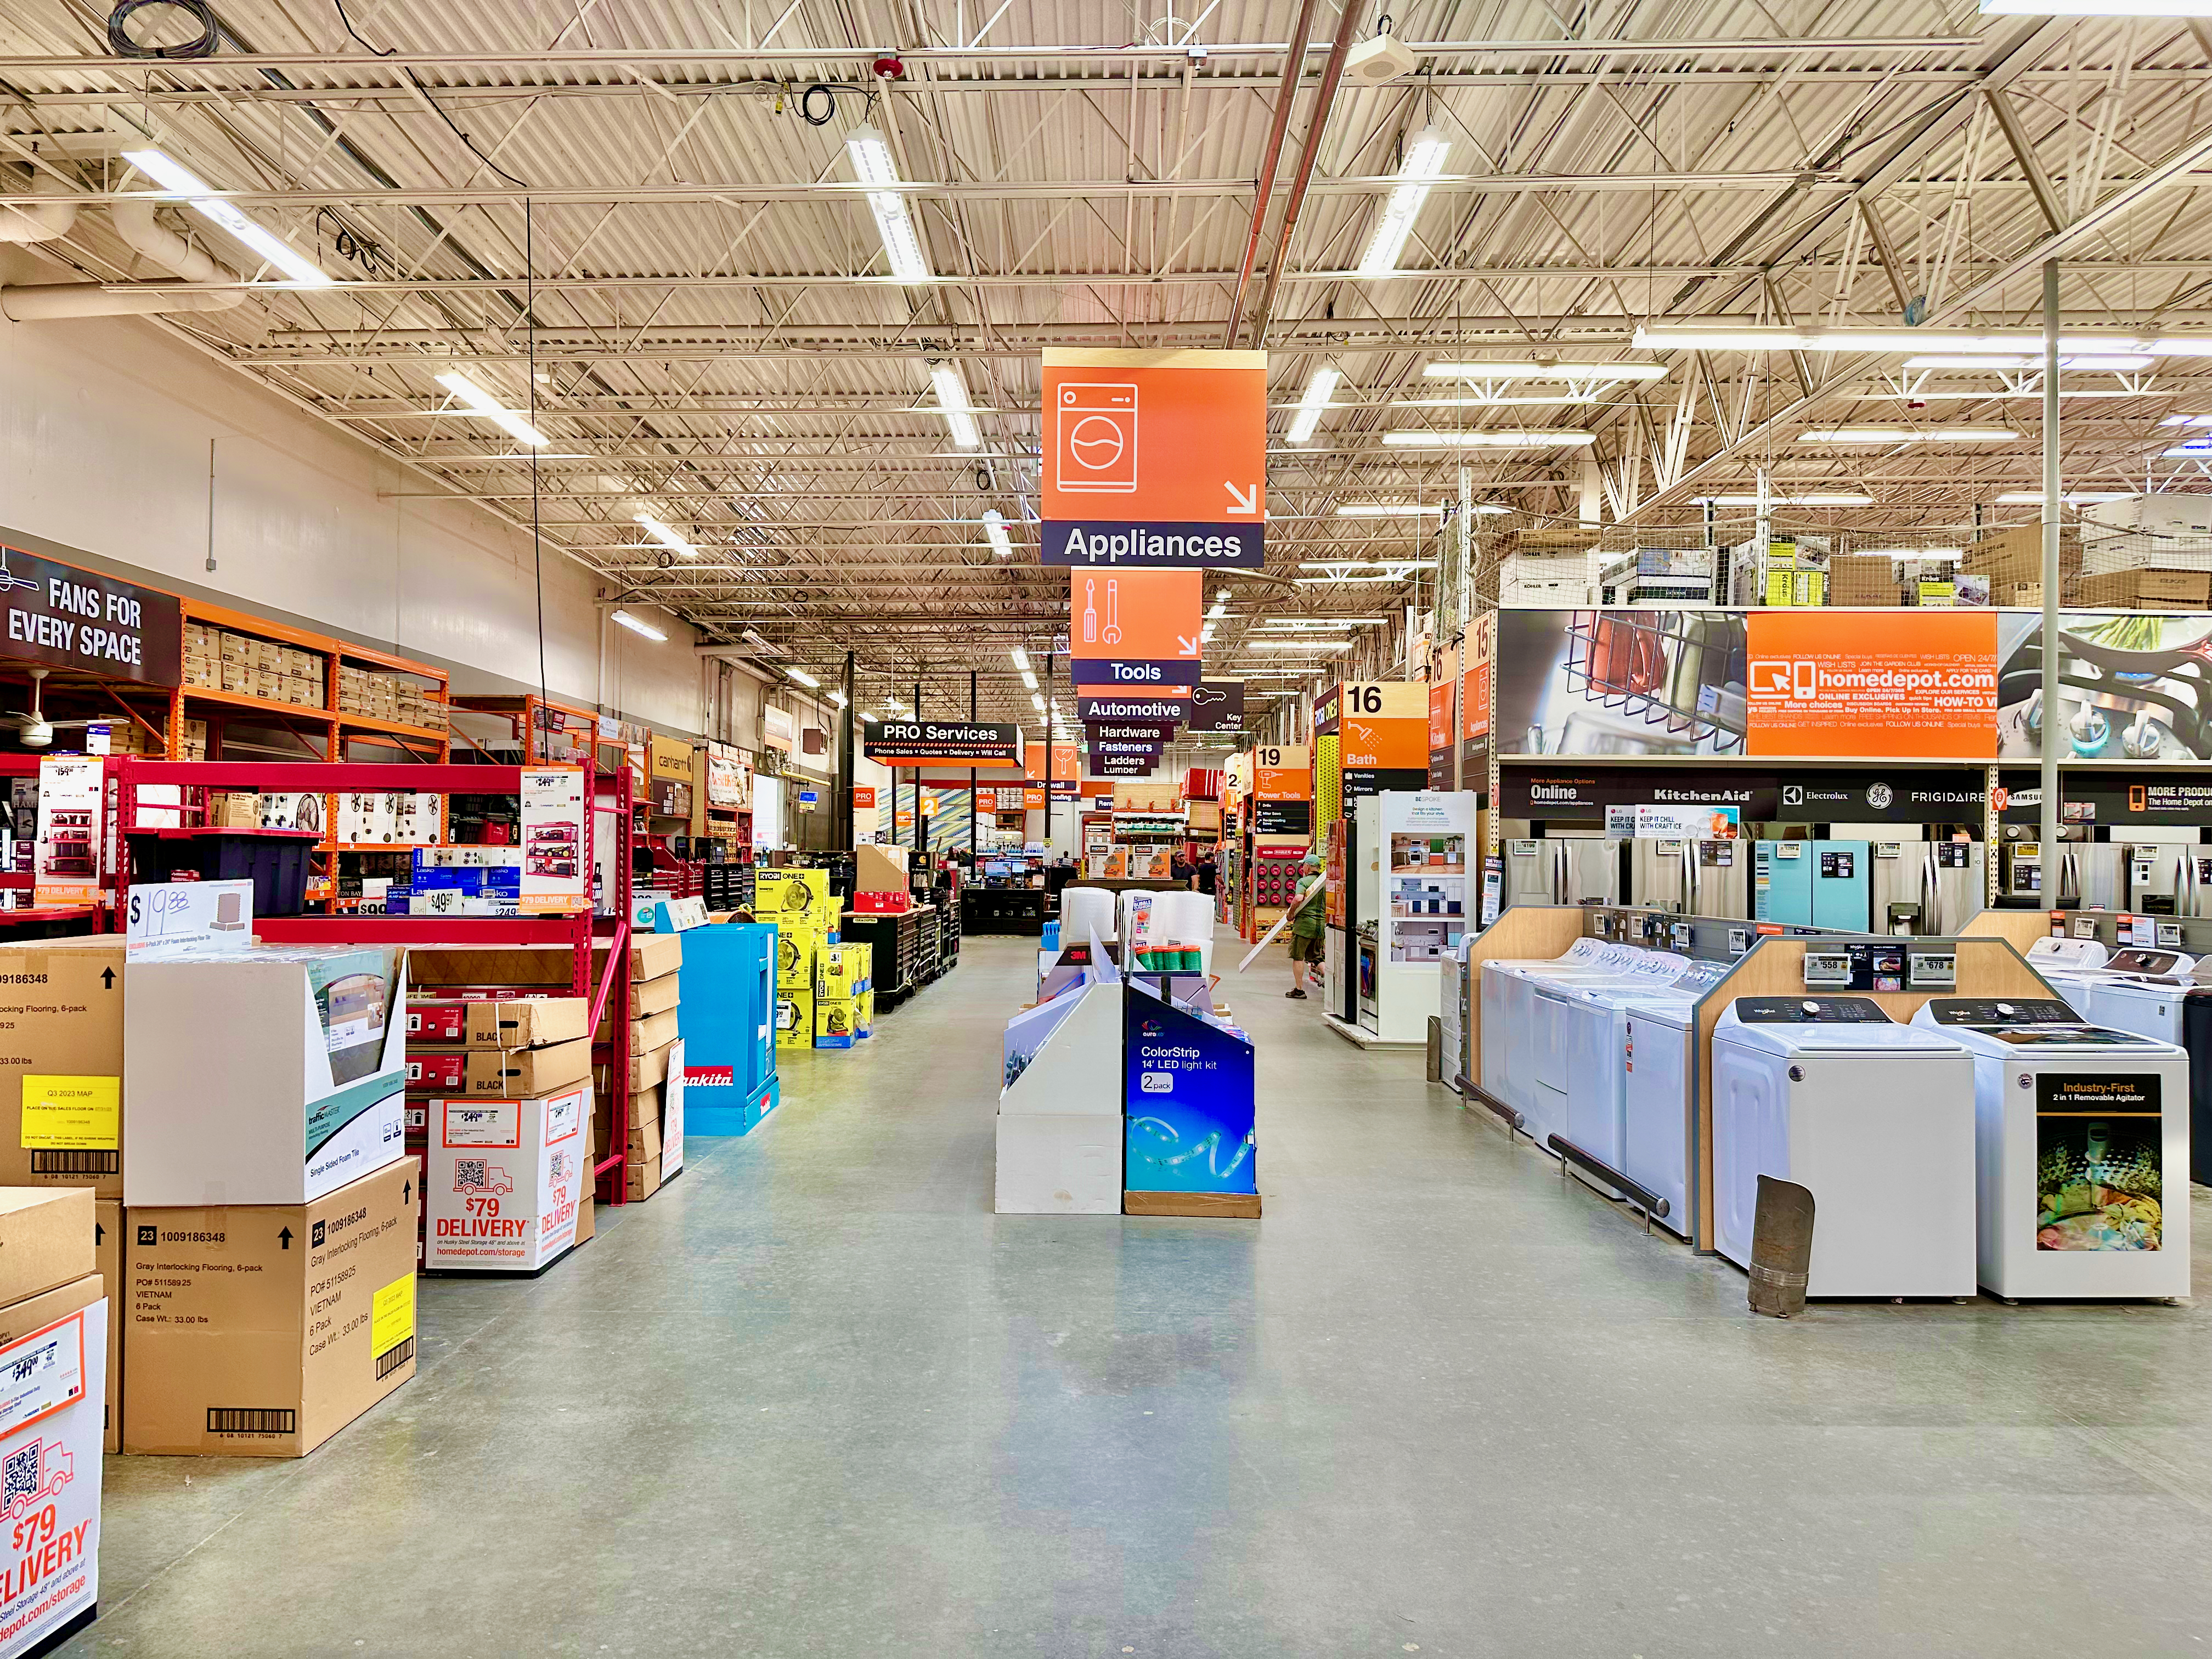 File:The appliances section of a Home Depot store in Blairsville